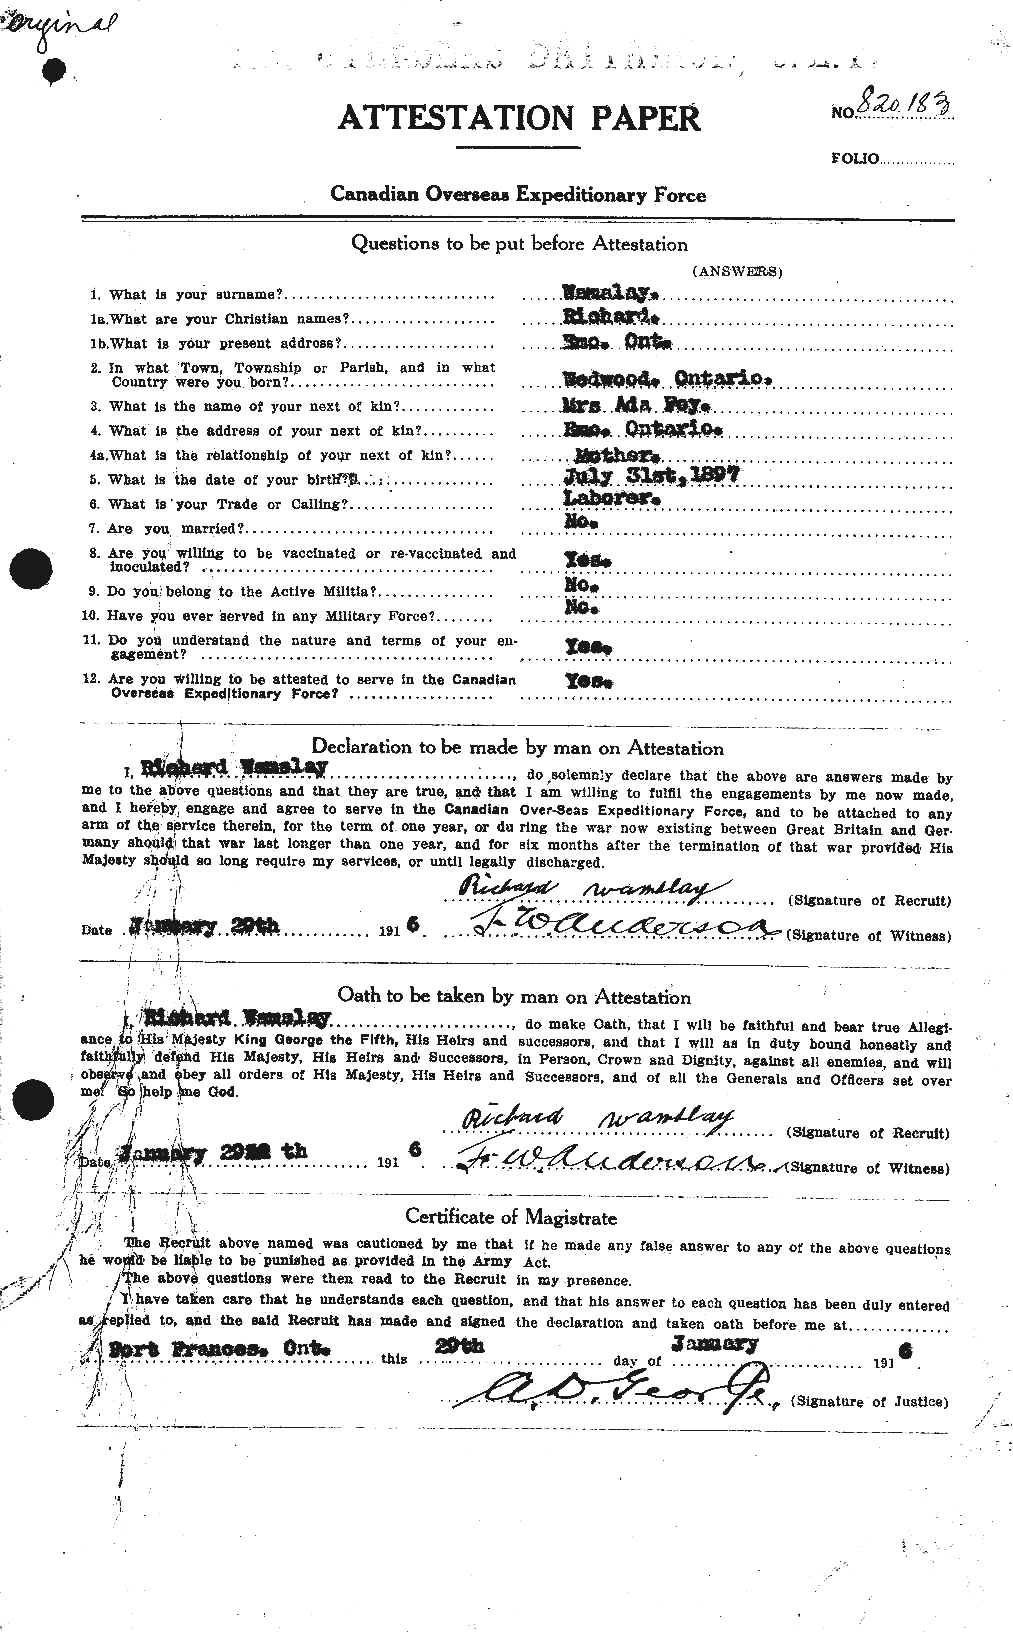 Personnel Records of the First World War - CEF 654893a